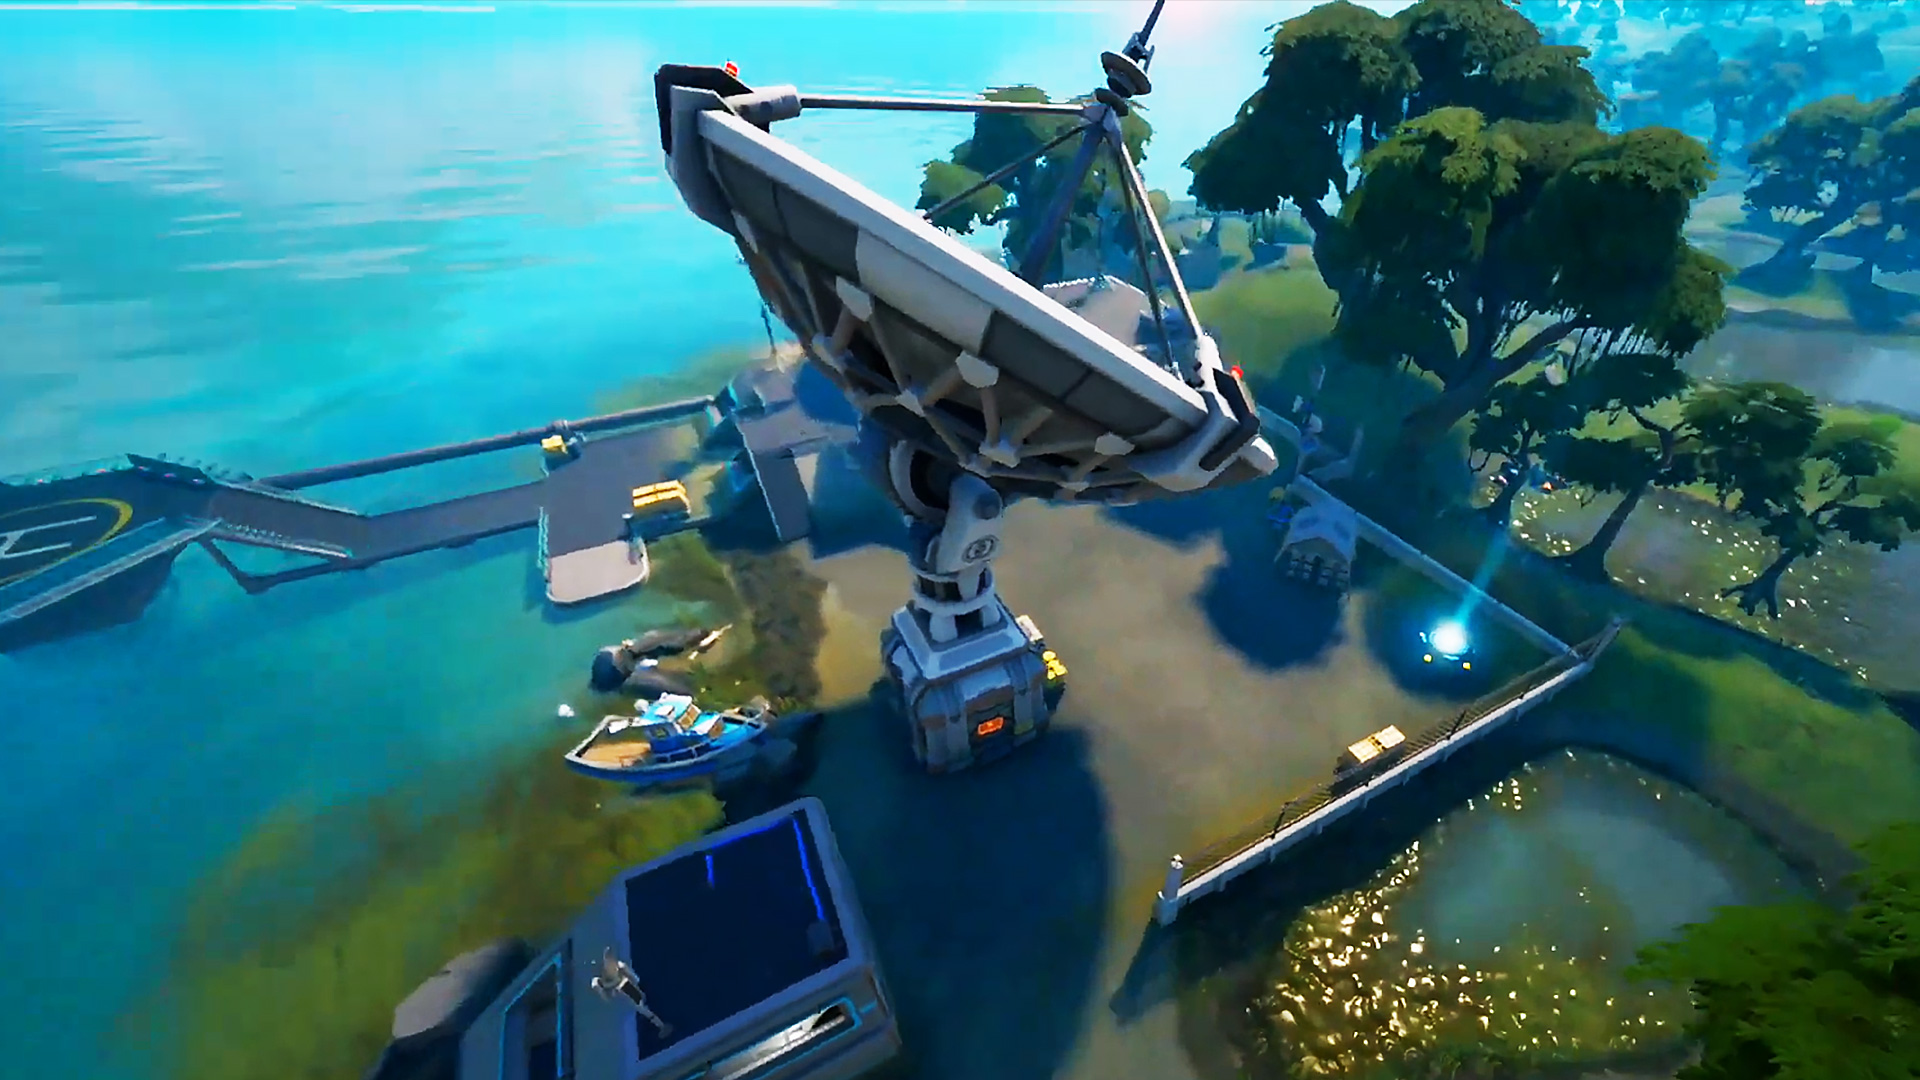 How to interact with equipment at IO radar dish bases in Fortnite